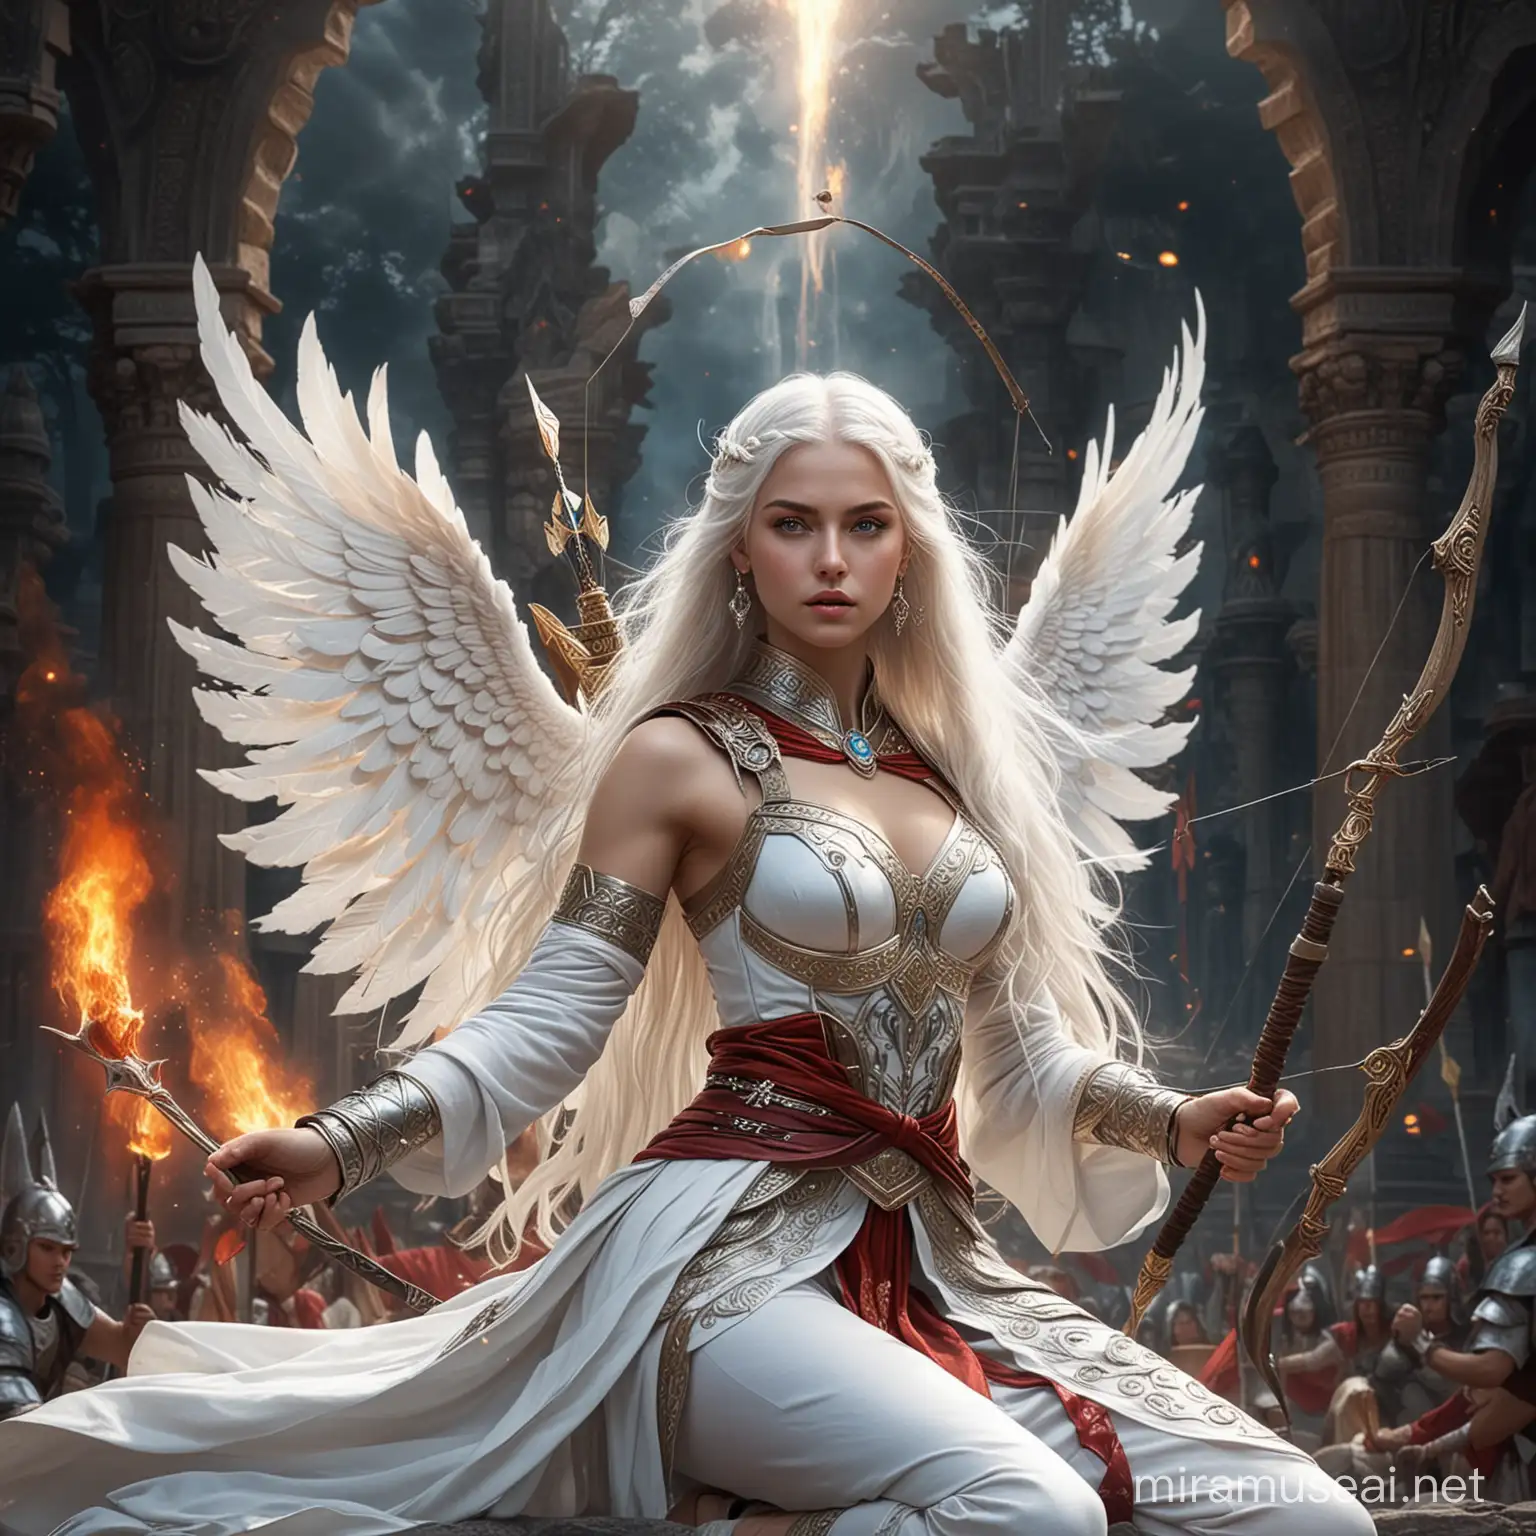 Beautiful Young Nazi Empress Goddess Seated on Majestic Throne with Long Wings